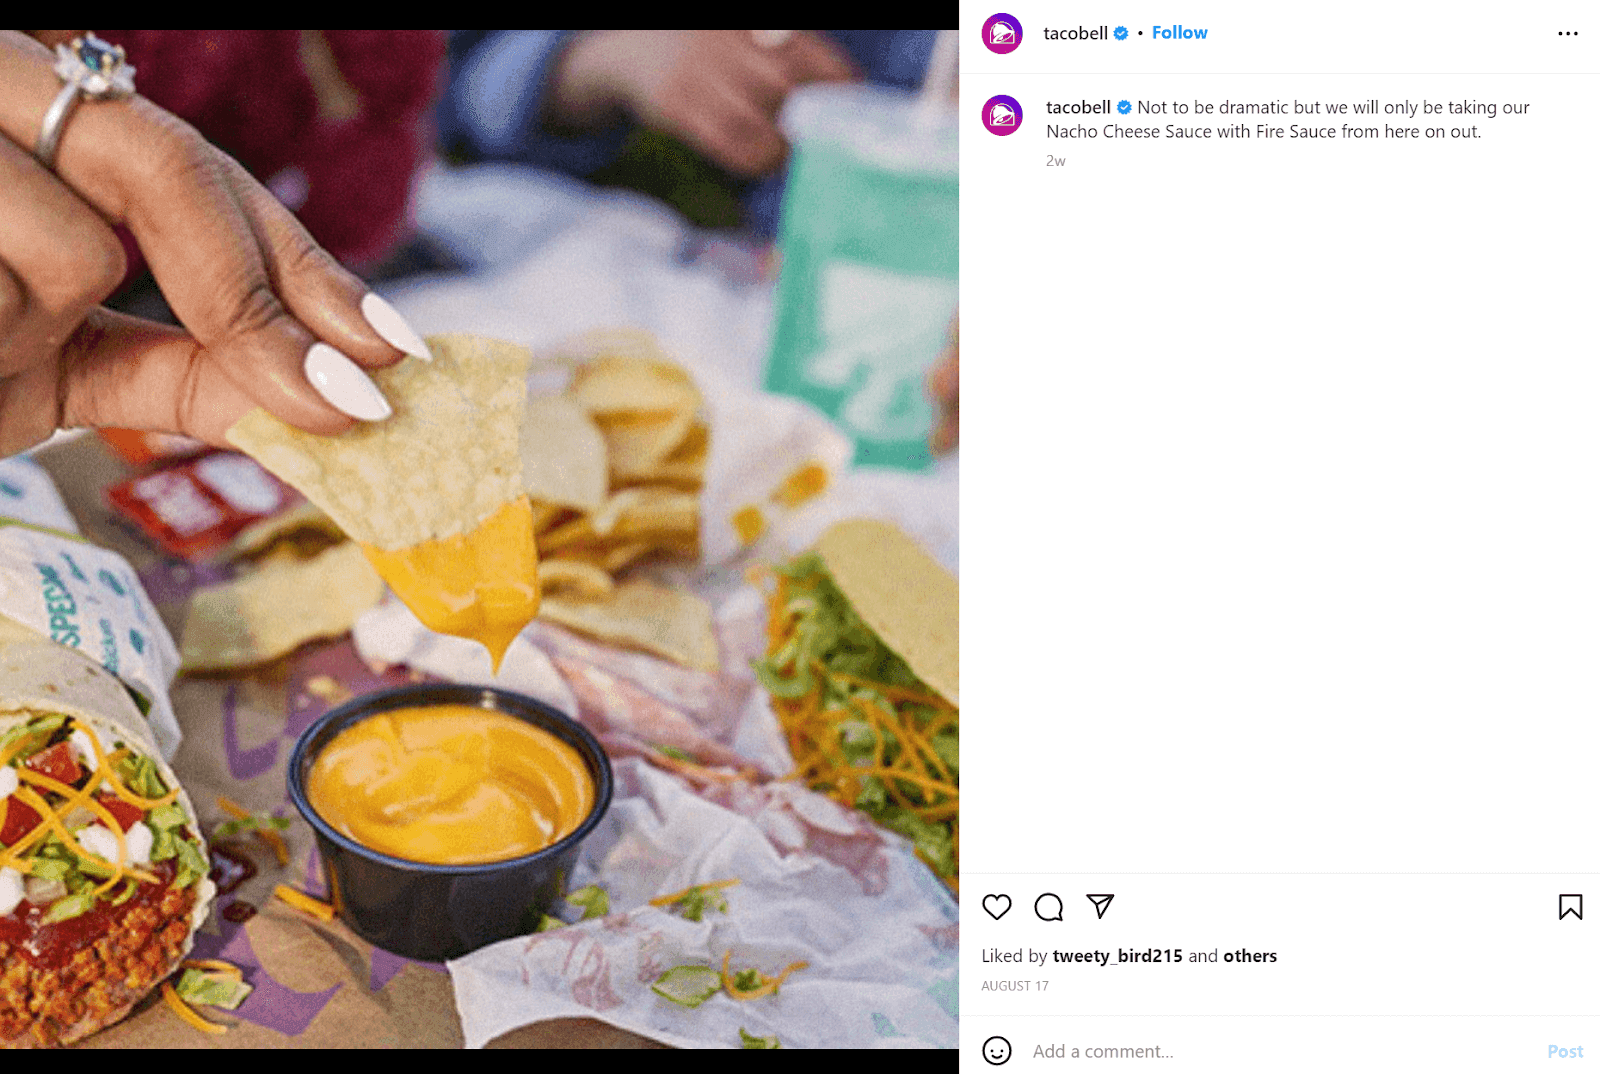 TacoBell marketing strategy and how they use social media